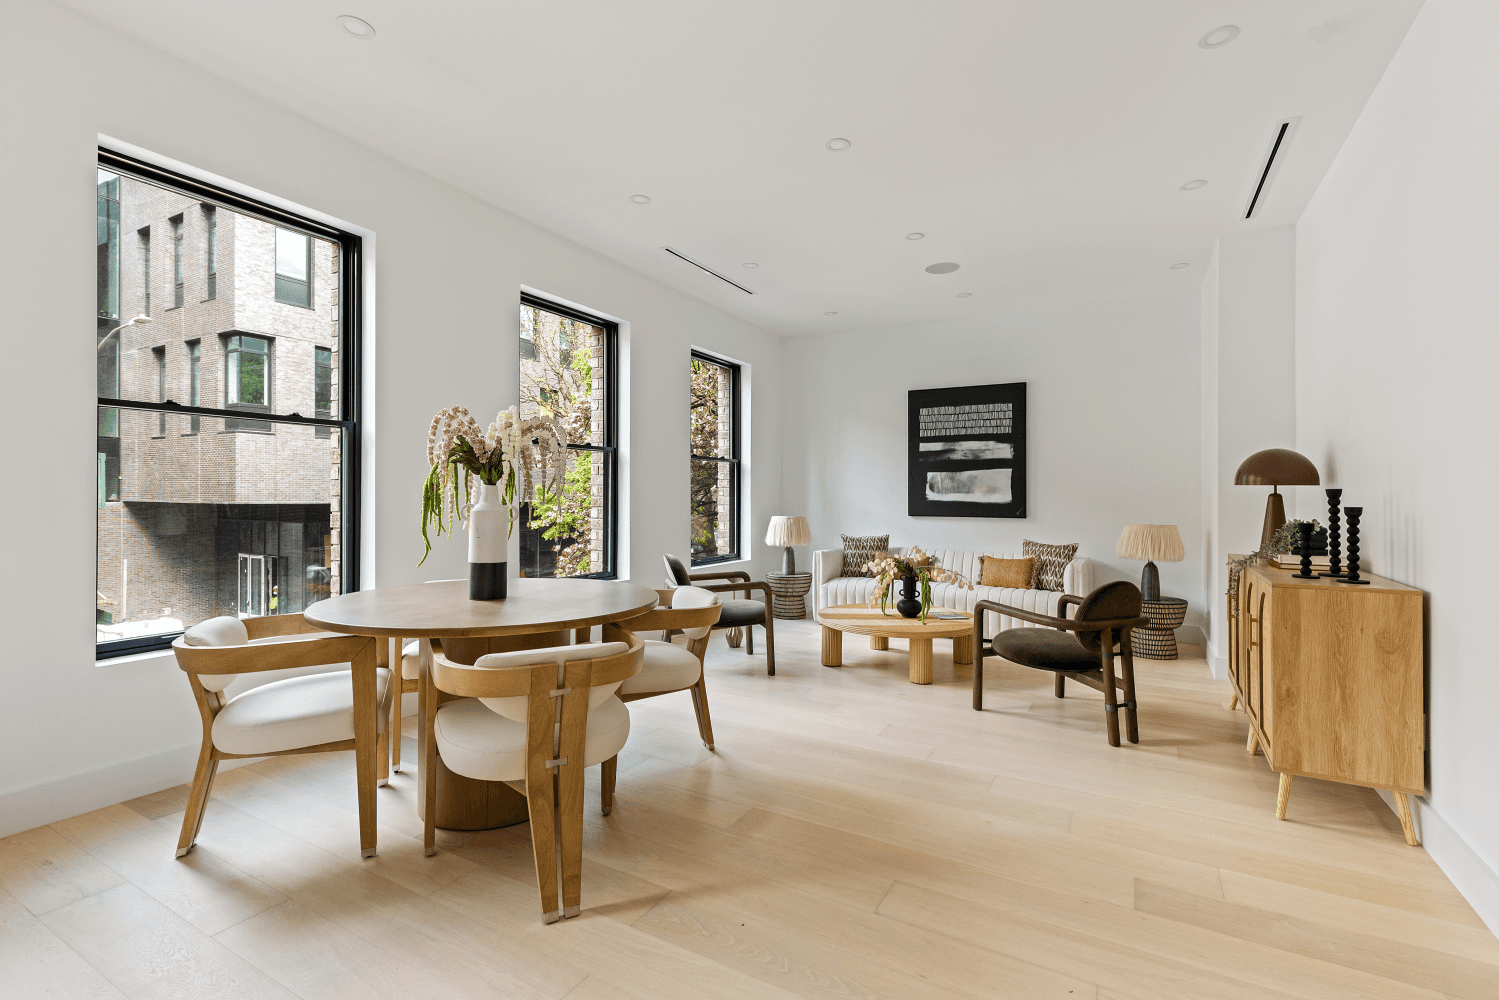 Introducing this brand new 2 bedroom, 2 bathroom floor through condo with private storage, a large balcony, and stunning interiors in the heart of Boerum Hill.